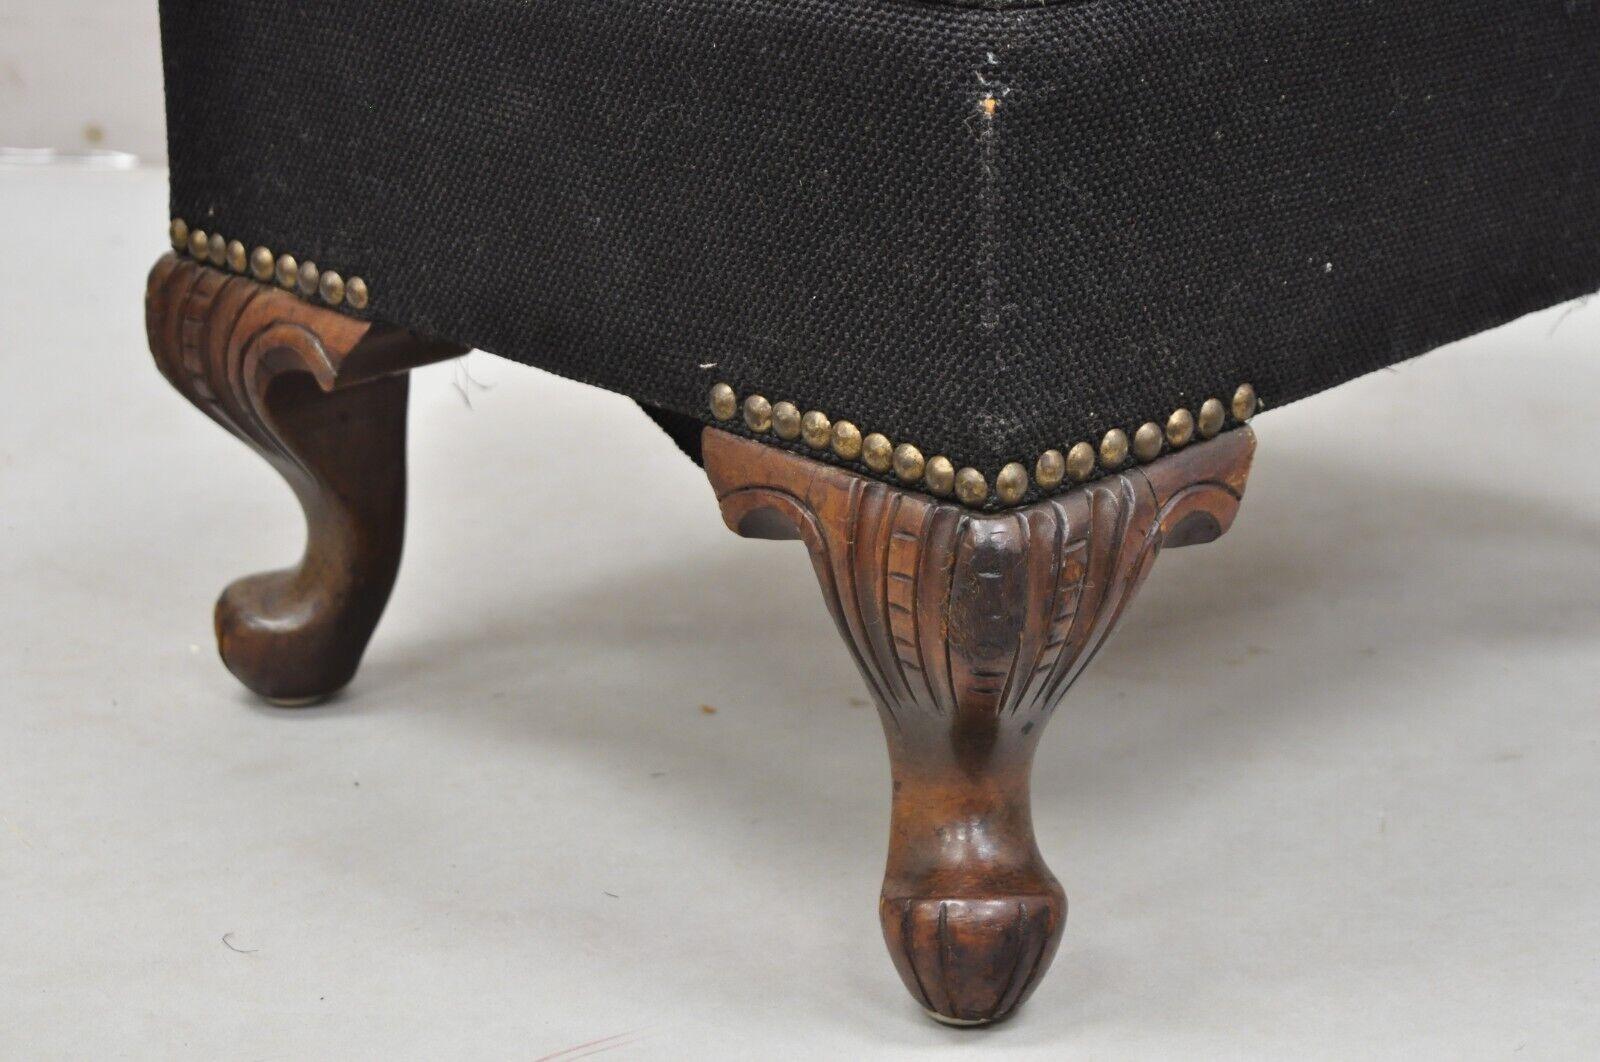 Antique French Figural Needlepoint Box Footstool Ottoman on Mahogany Legs For Sale 3